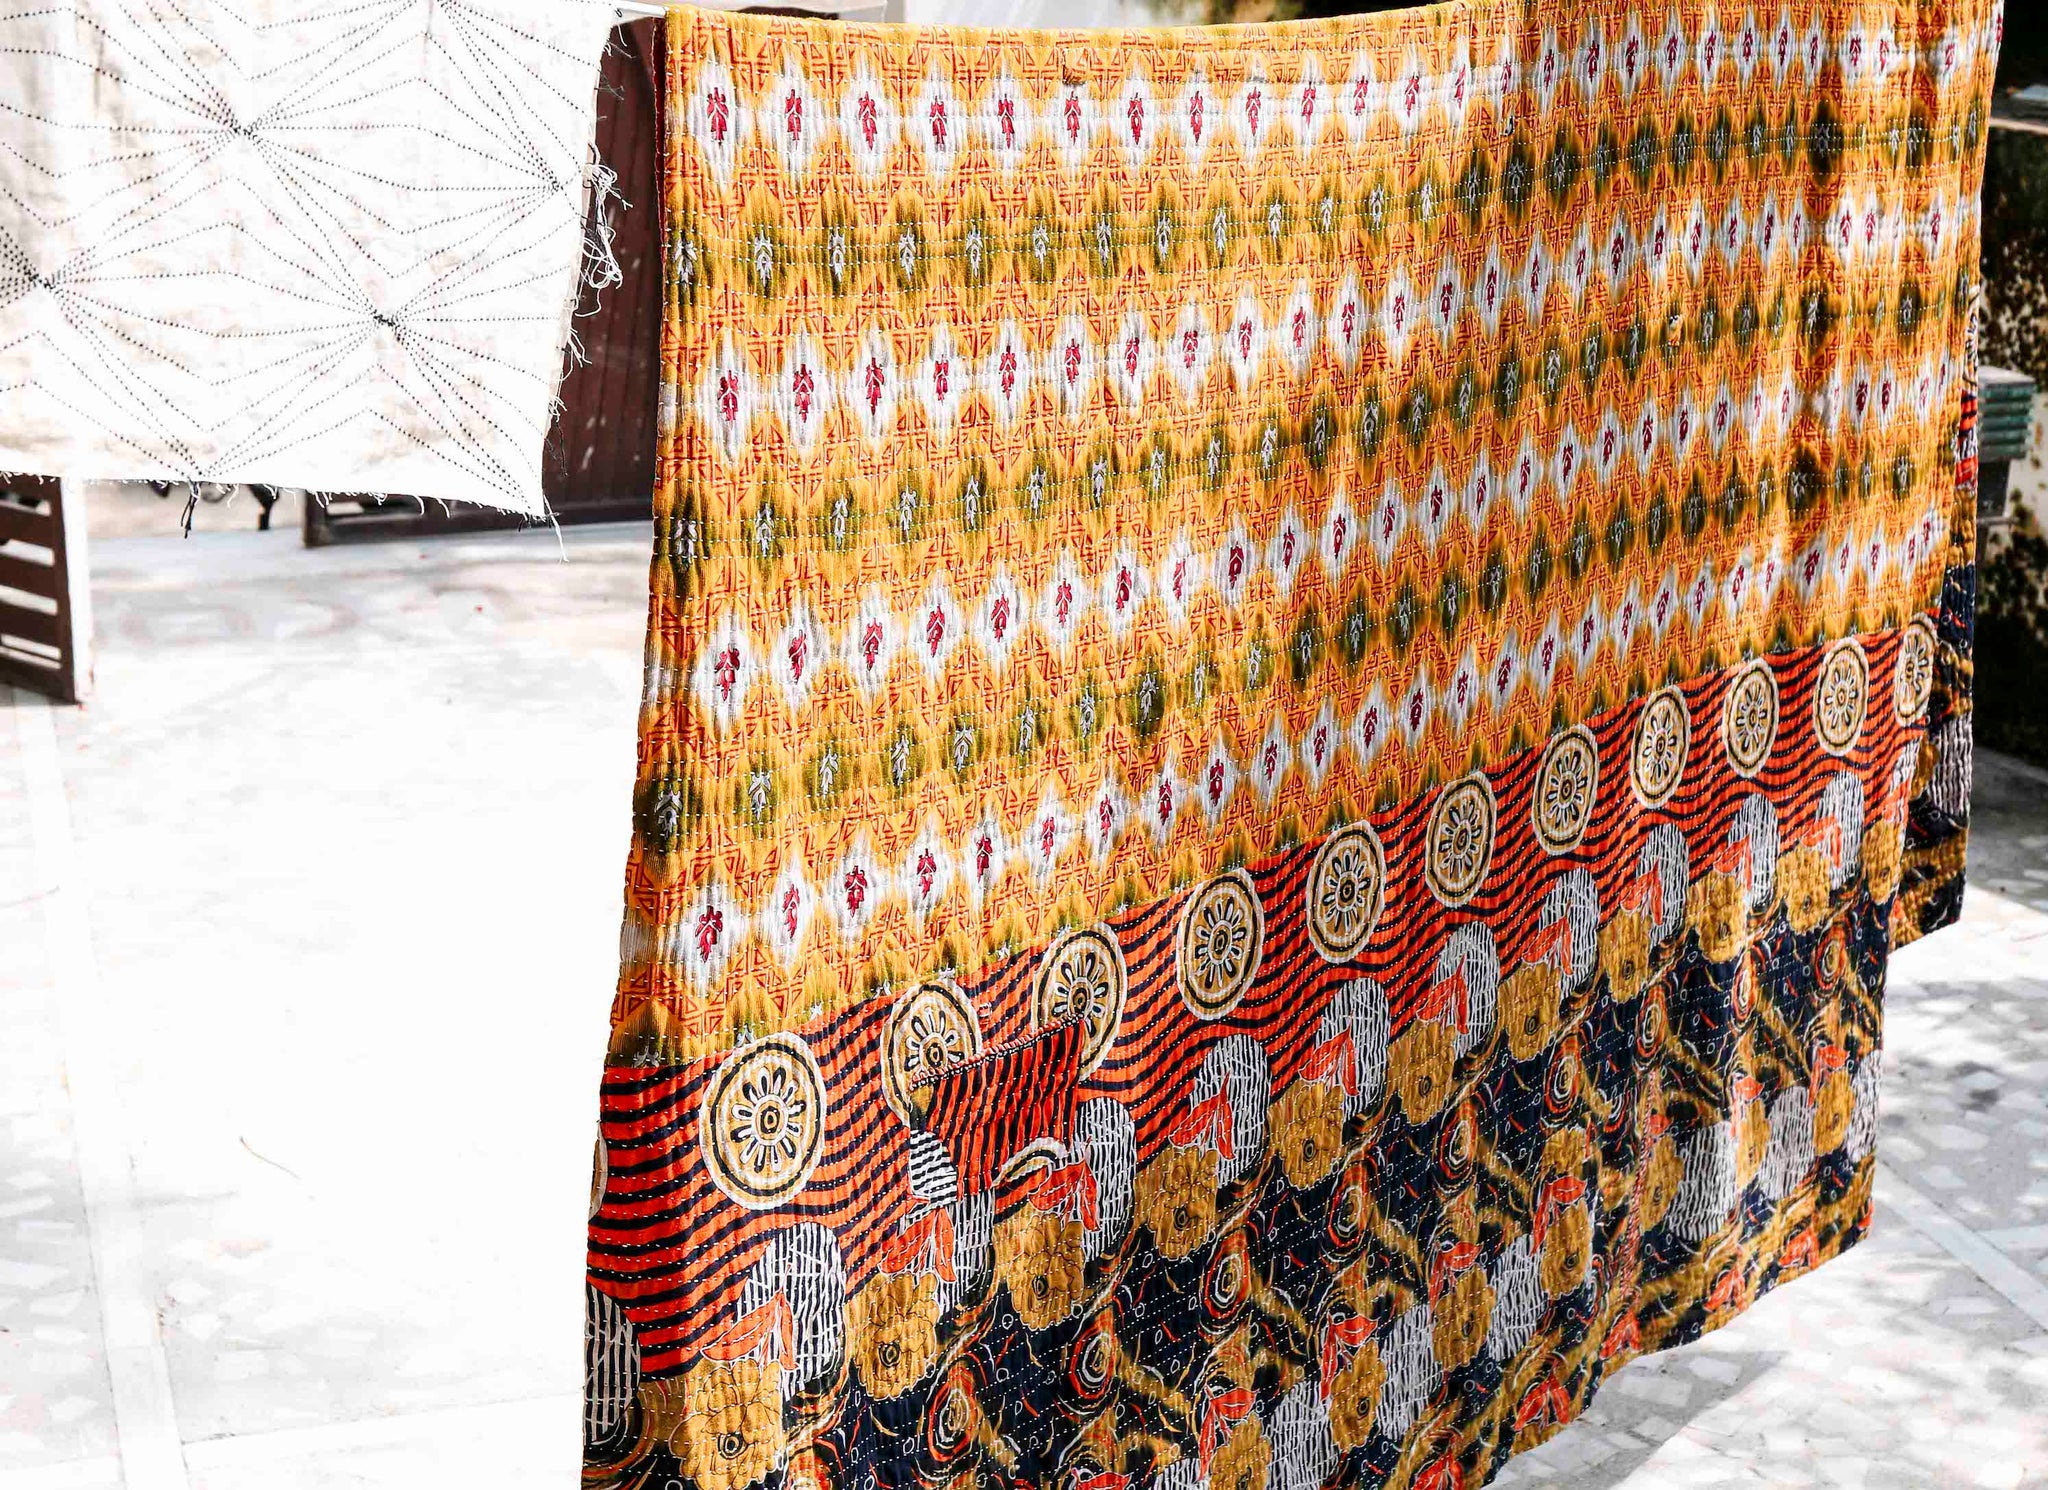 Indian Cotton Scrap Fabric  Vintage Kantha Quilt and Throws